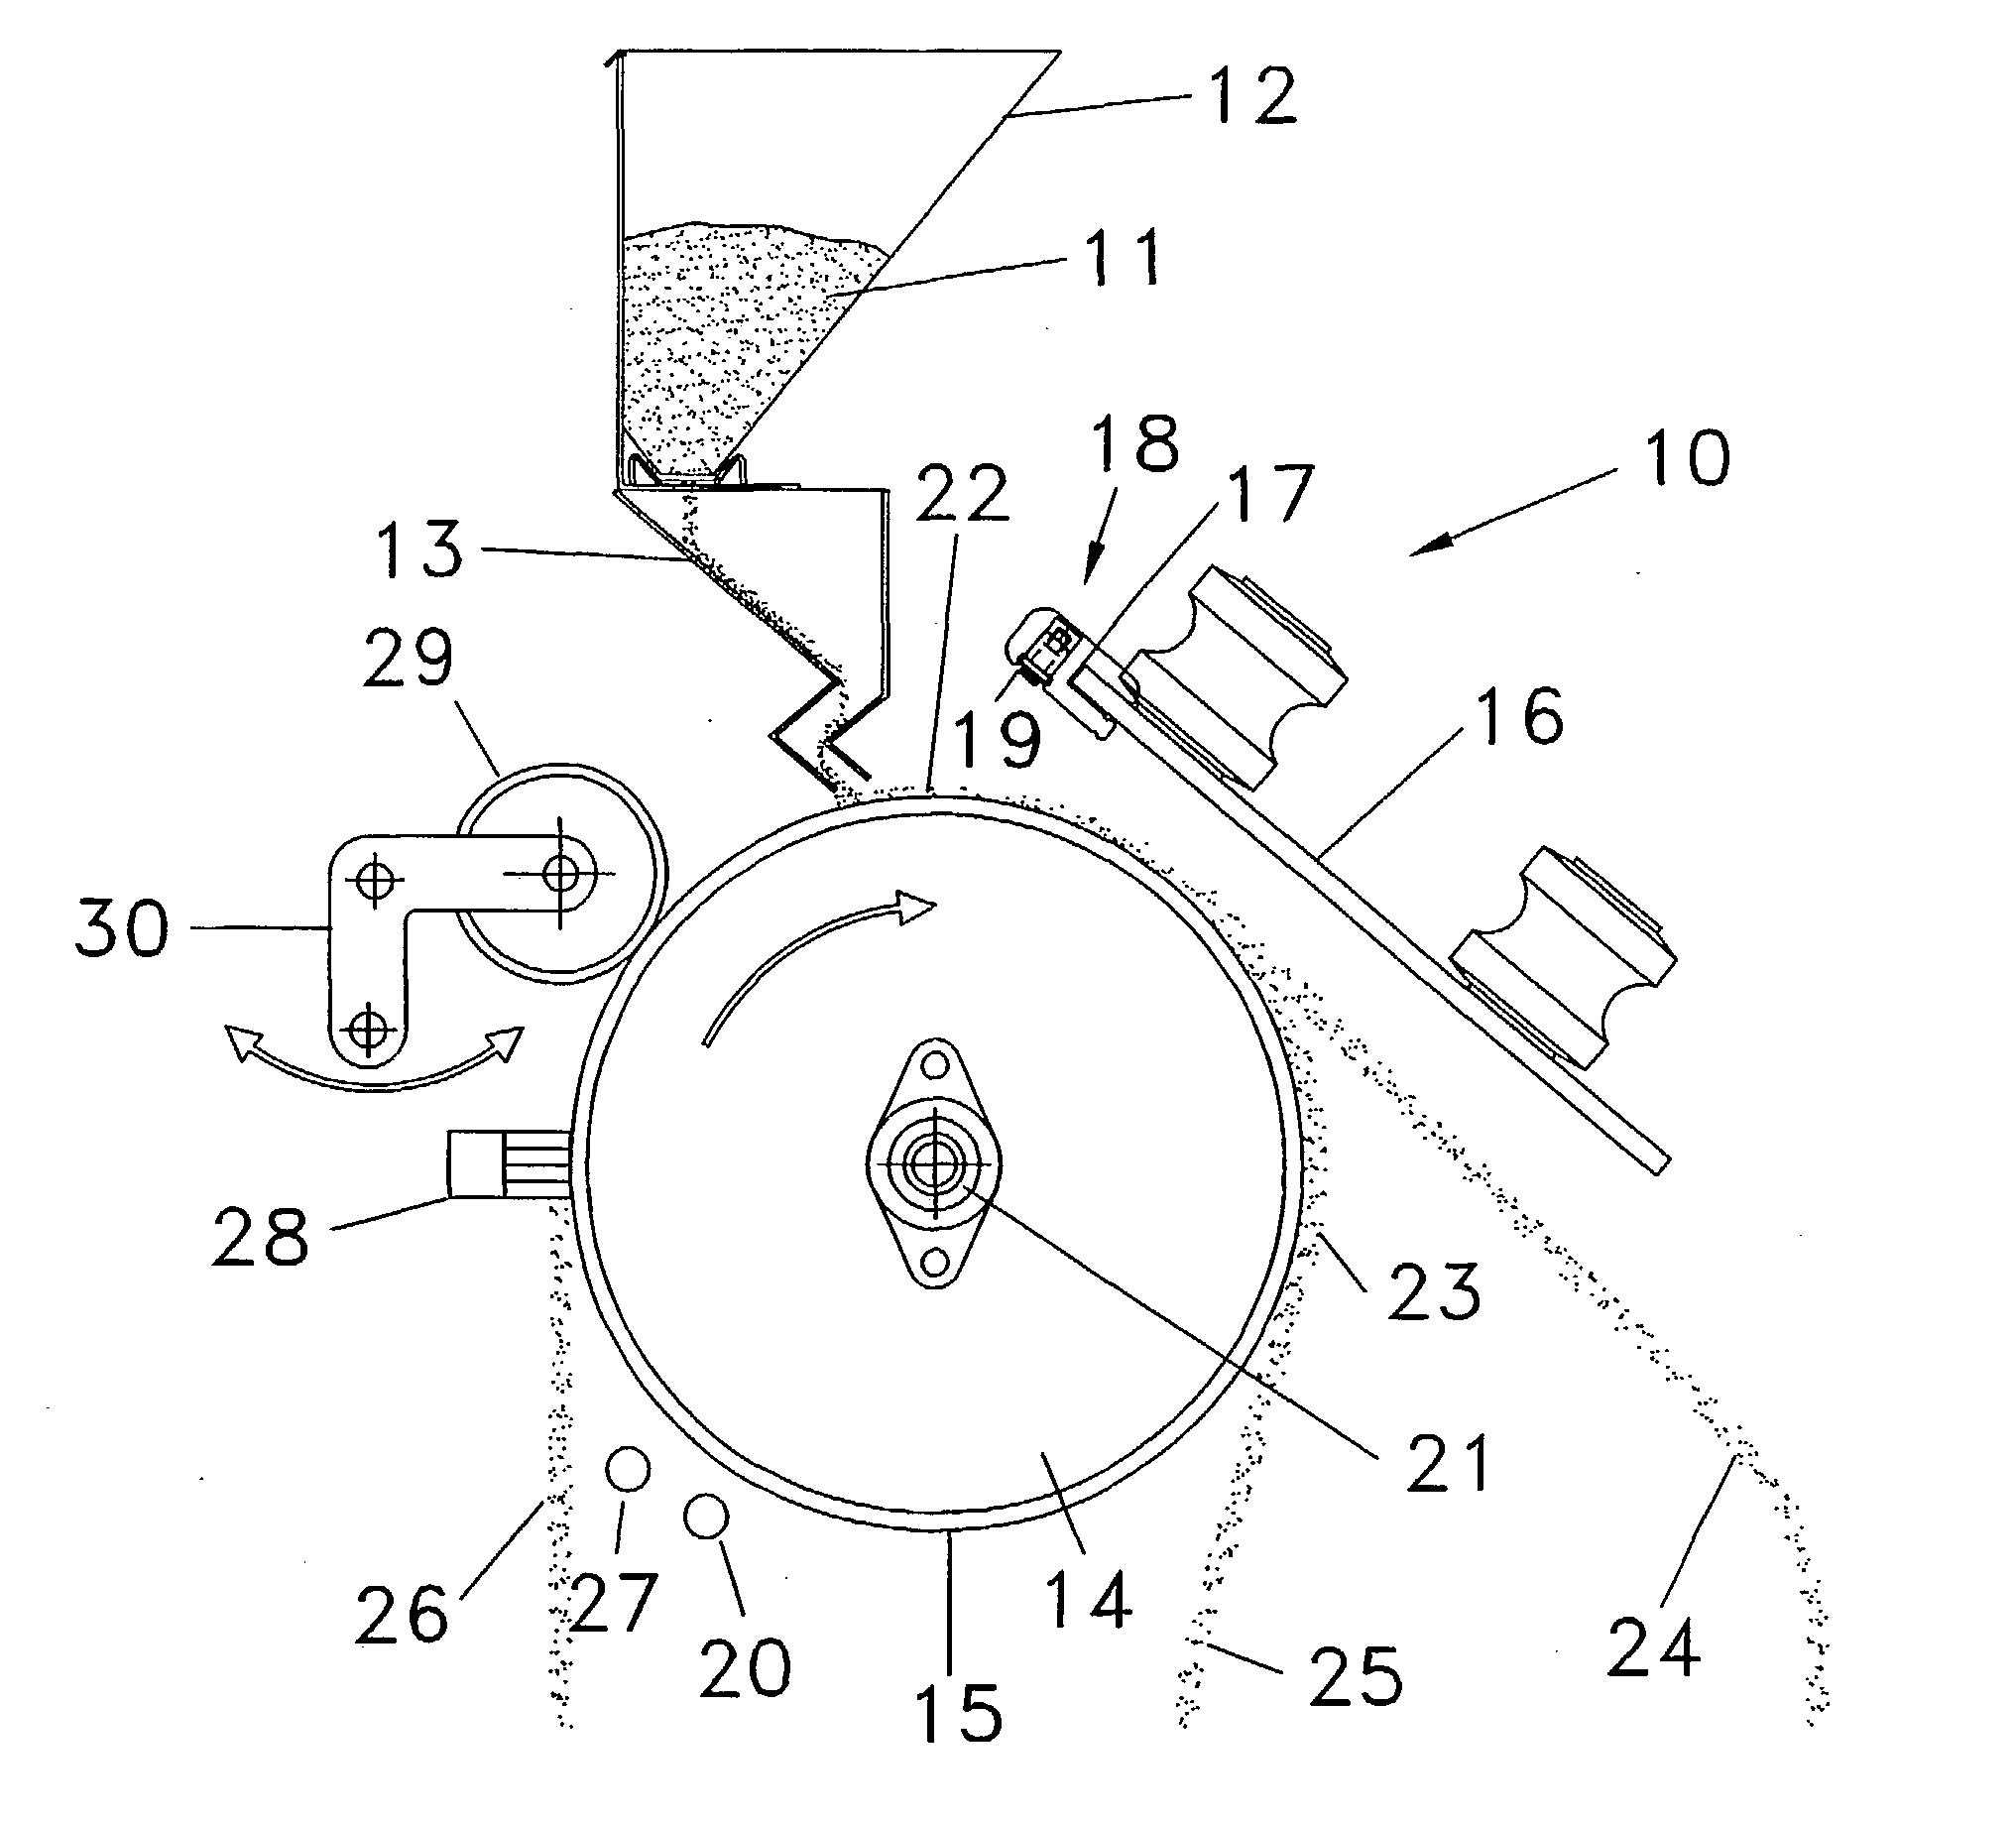 Apparatus for the electrostatic separation of particulate mixtures